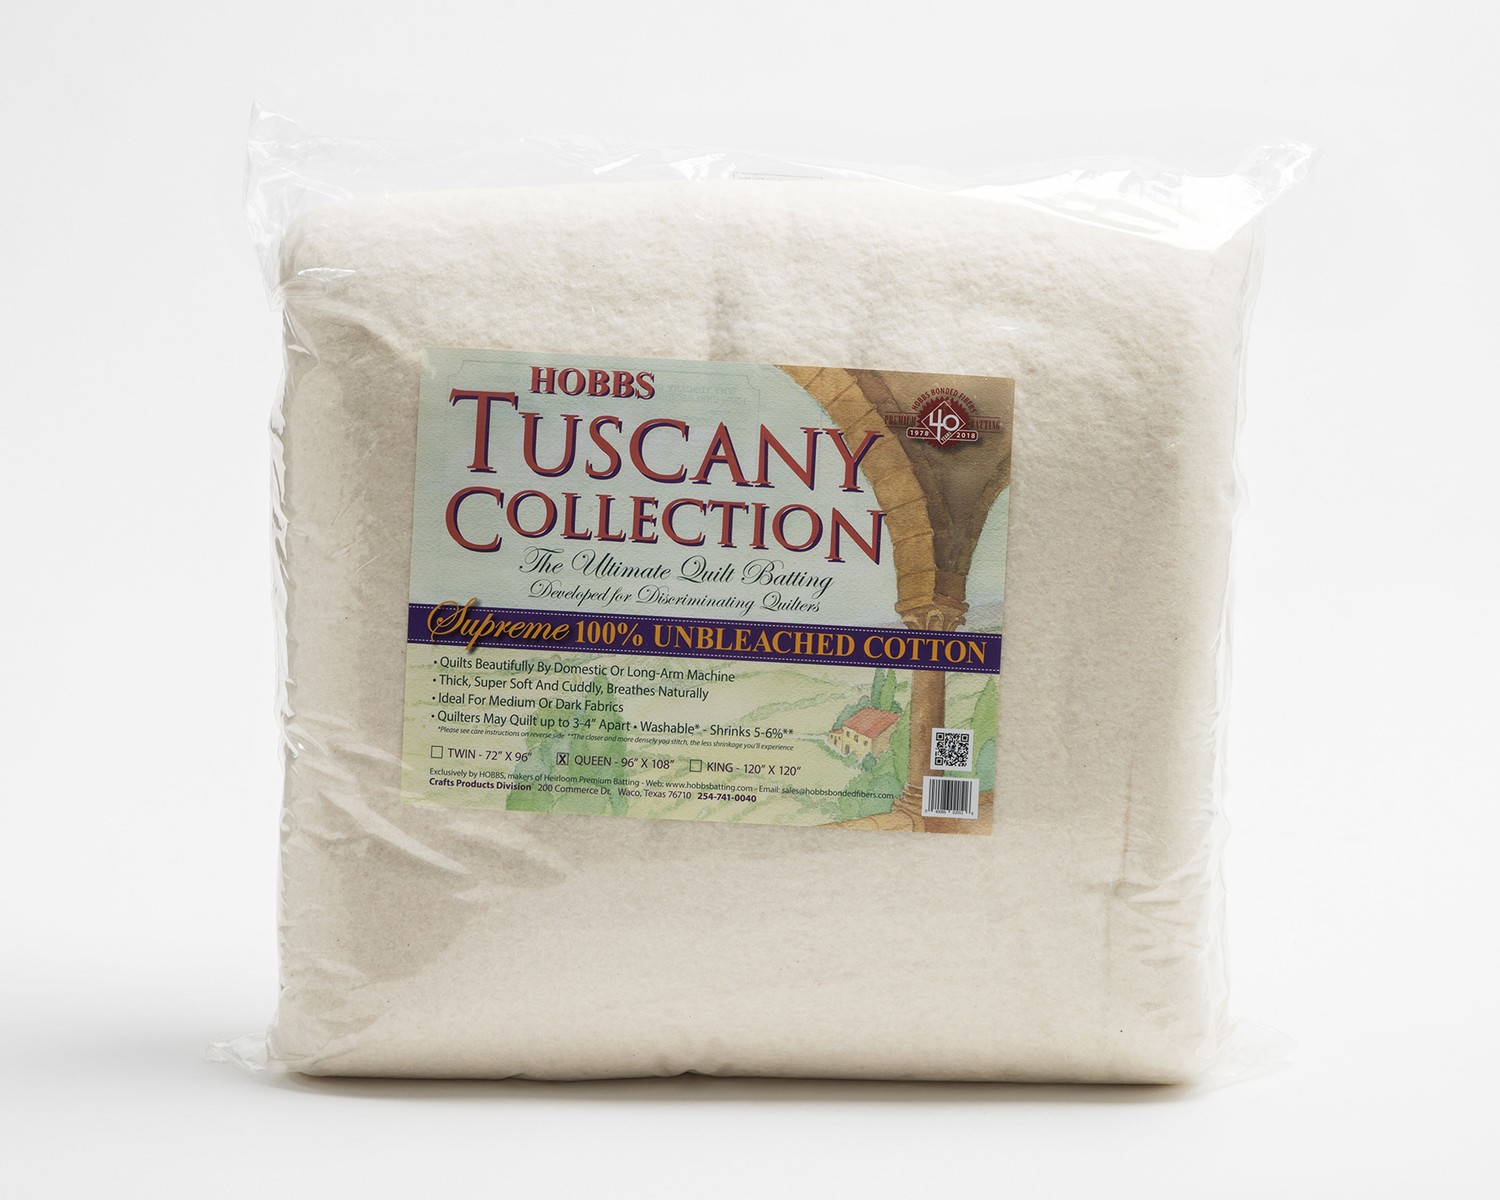 Hobbs Tuscany Supreme 100% Unbleached Natural Cotton Batting Twin 72in x 96in